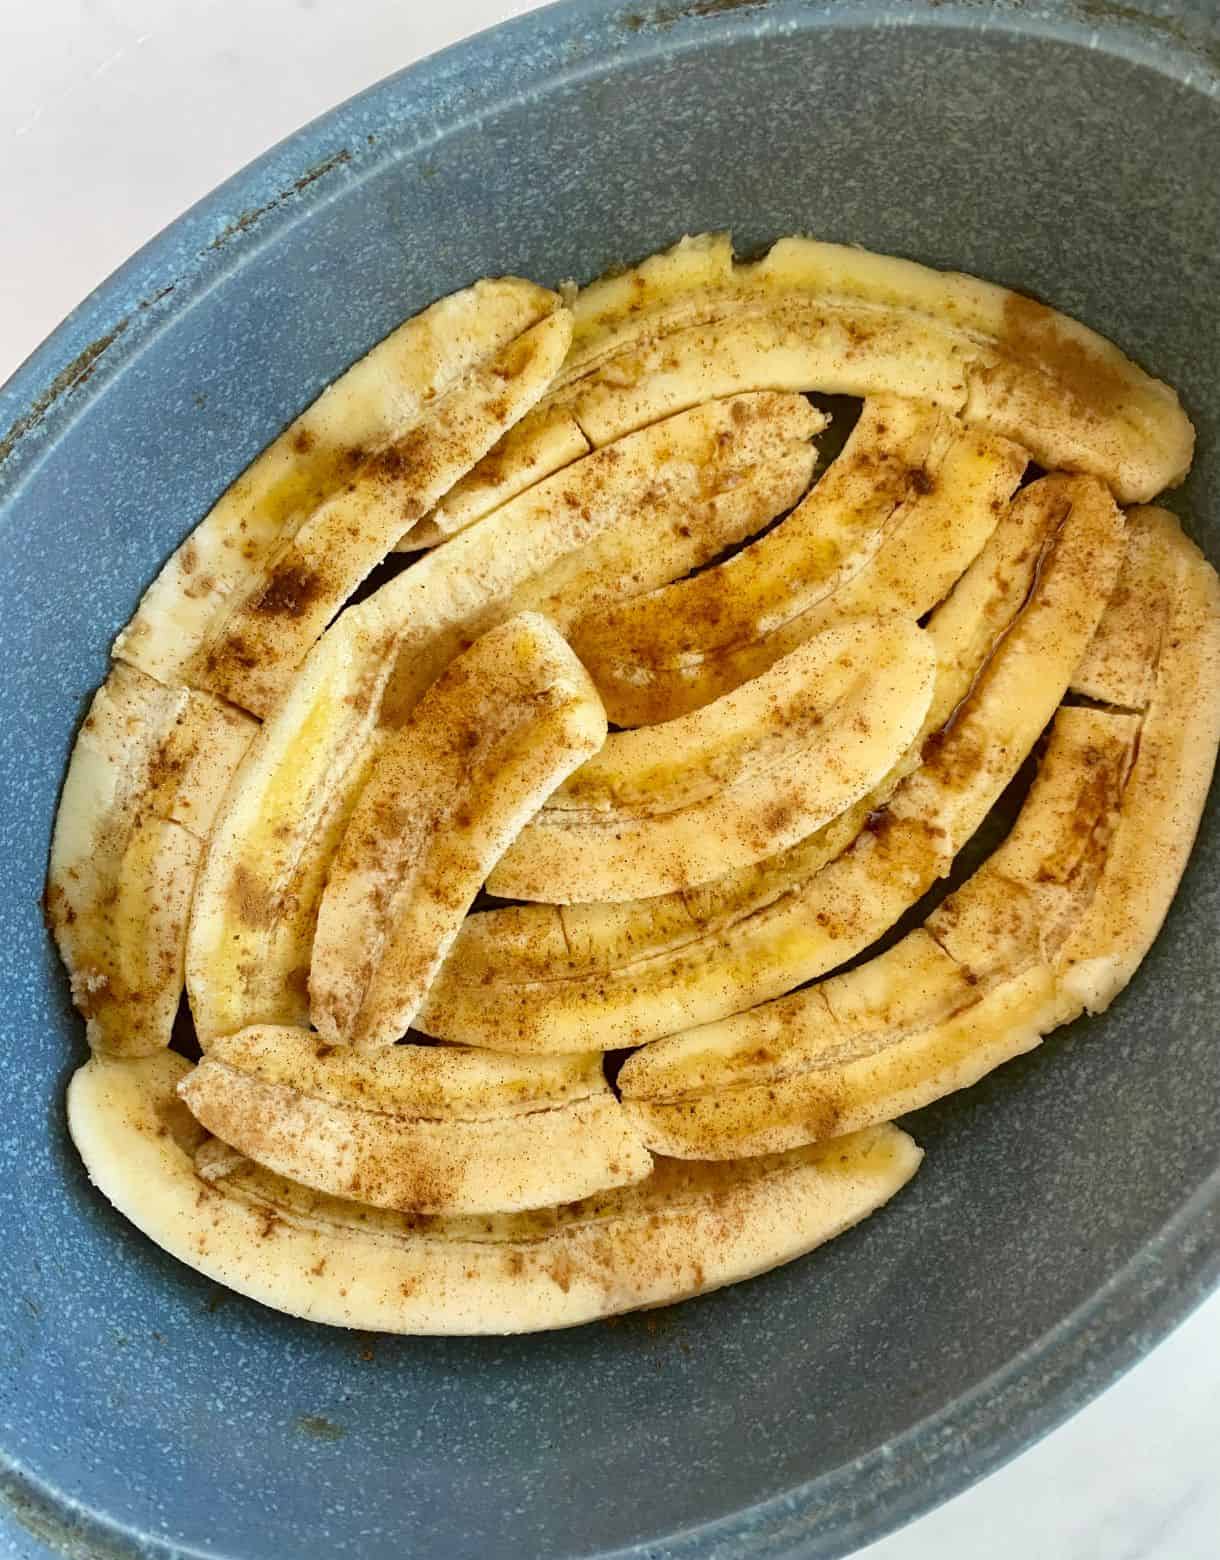 A dish with bananas sliced in half lengthwise then sprinkled with bourbon, vanilla and cinnamon and ready to go in the oven for Healthy Bananas Foster.